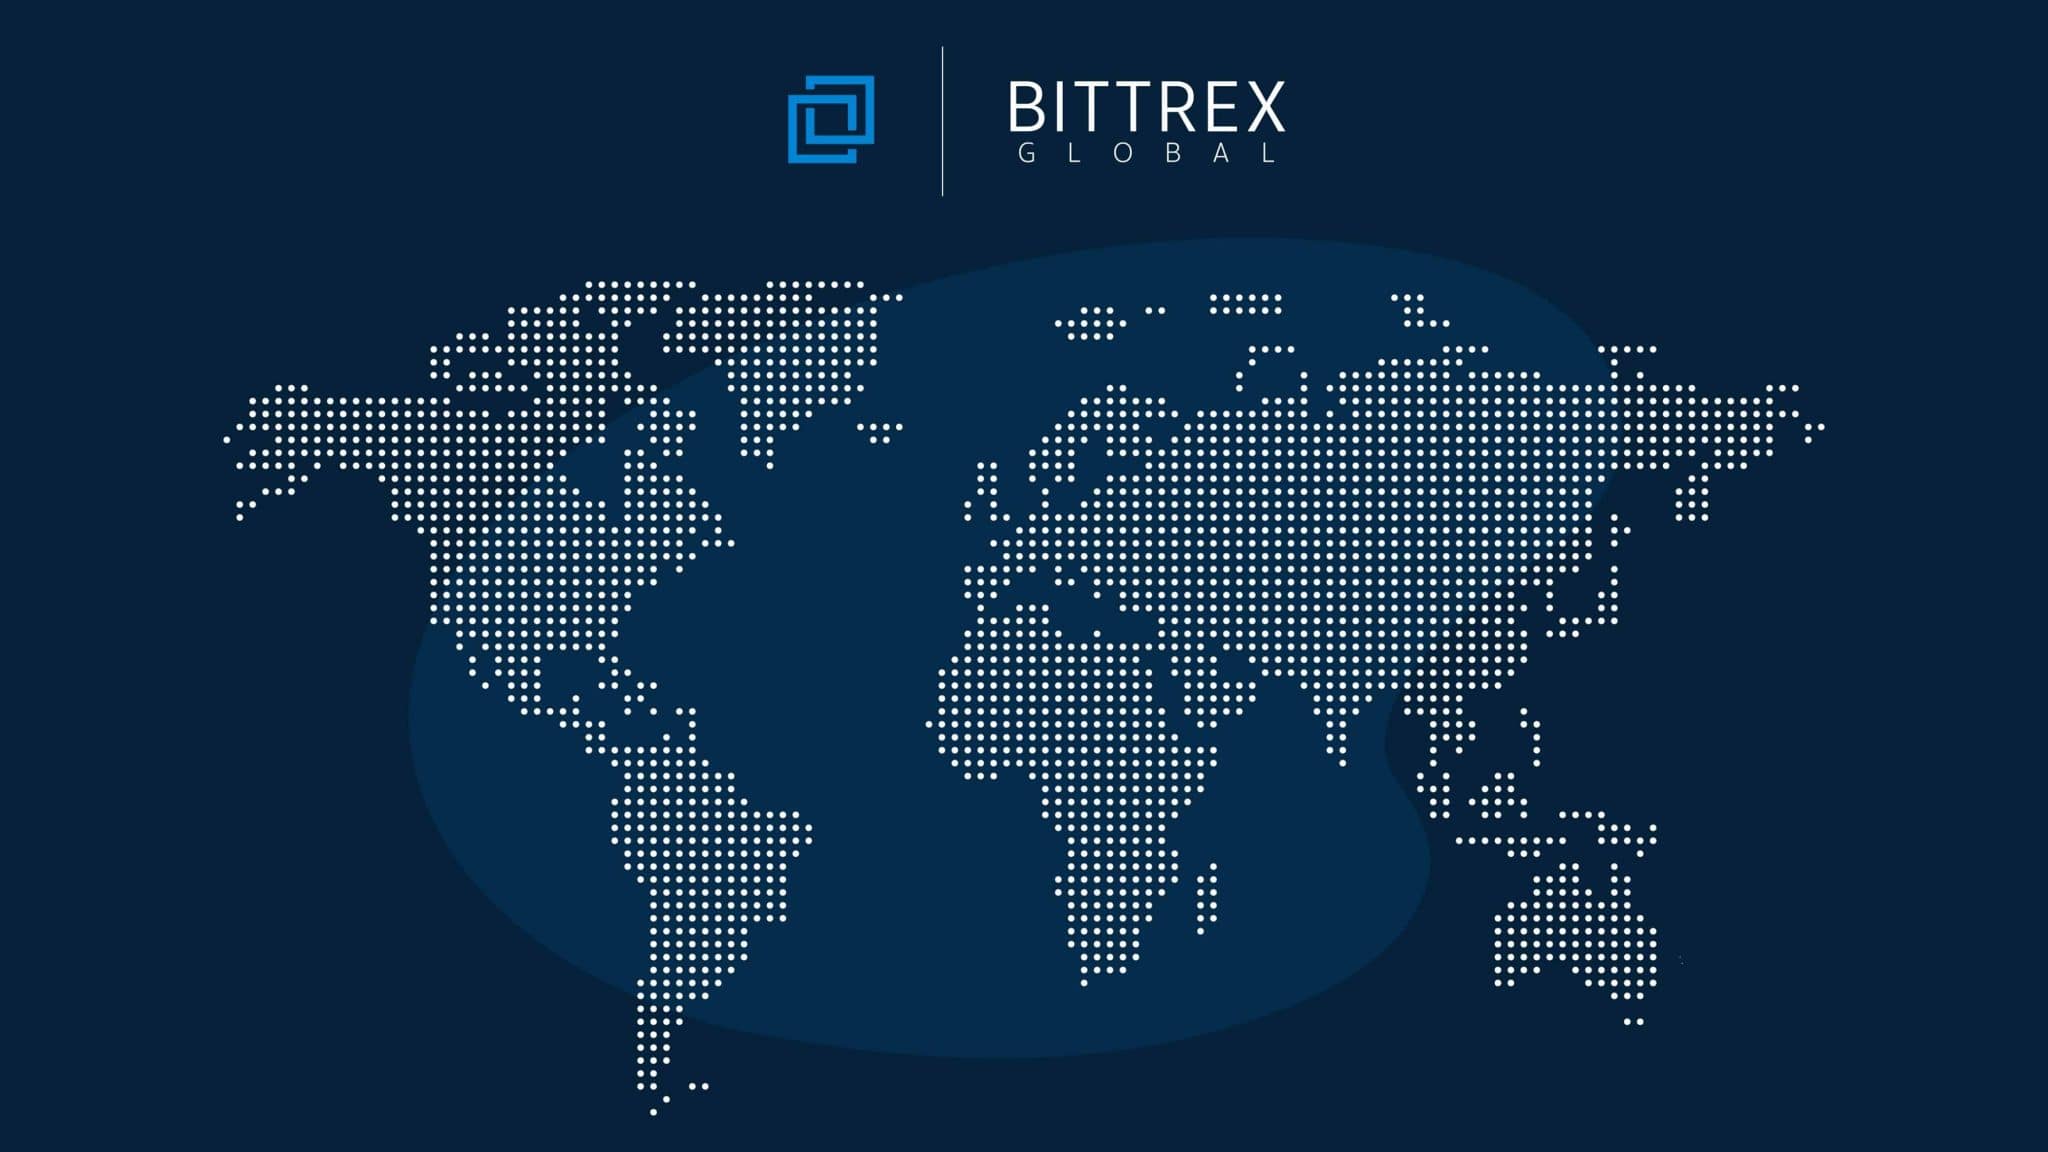 We Compared Crypto Trading Liquidity on Bittrex and Binance